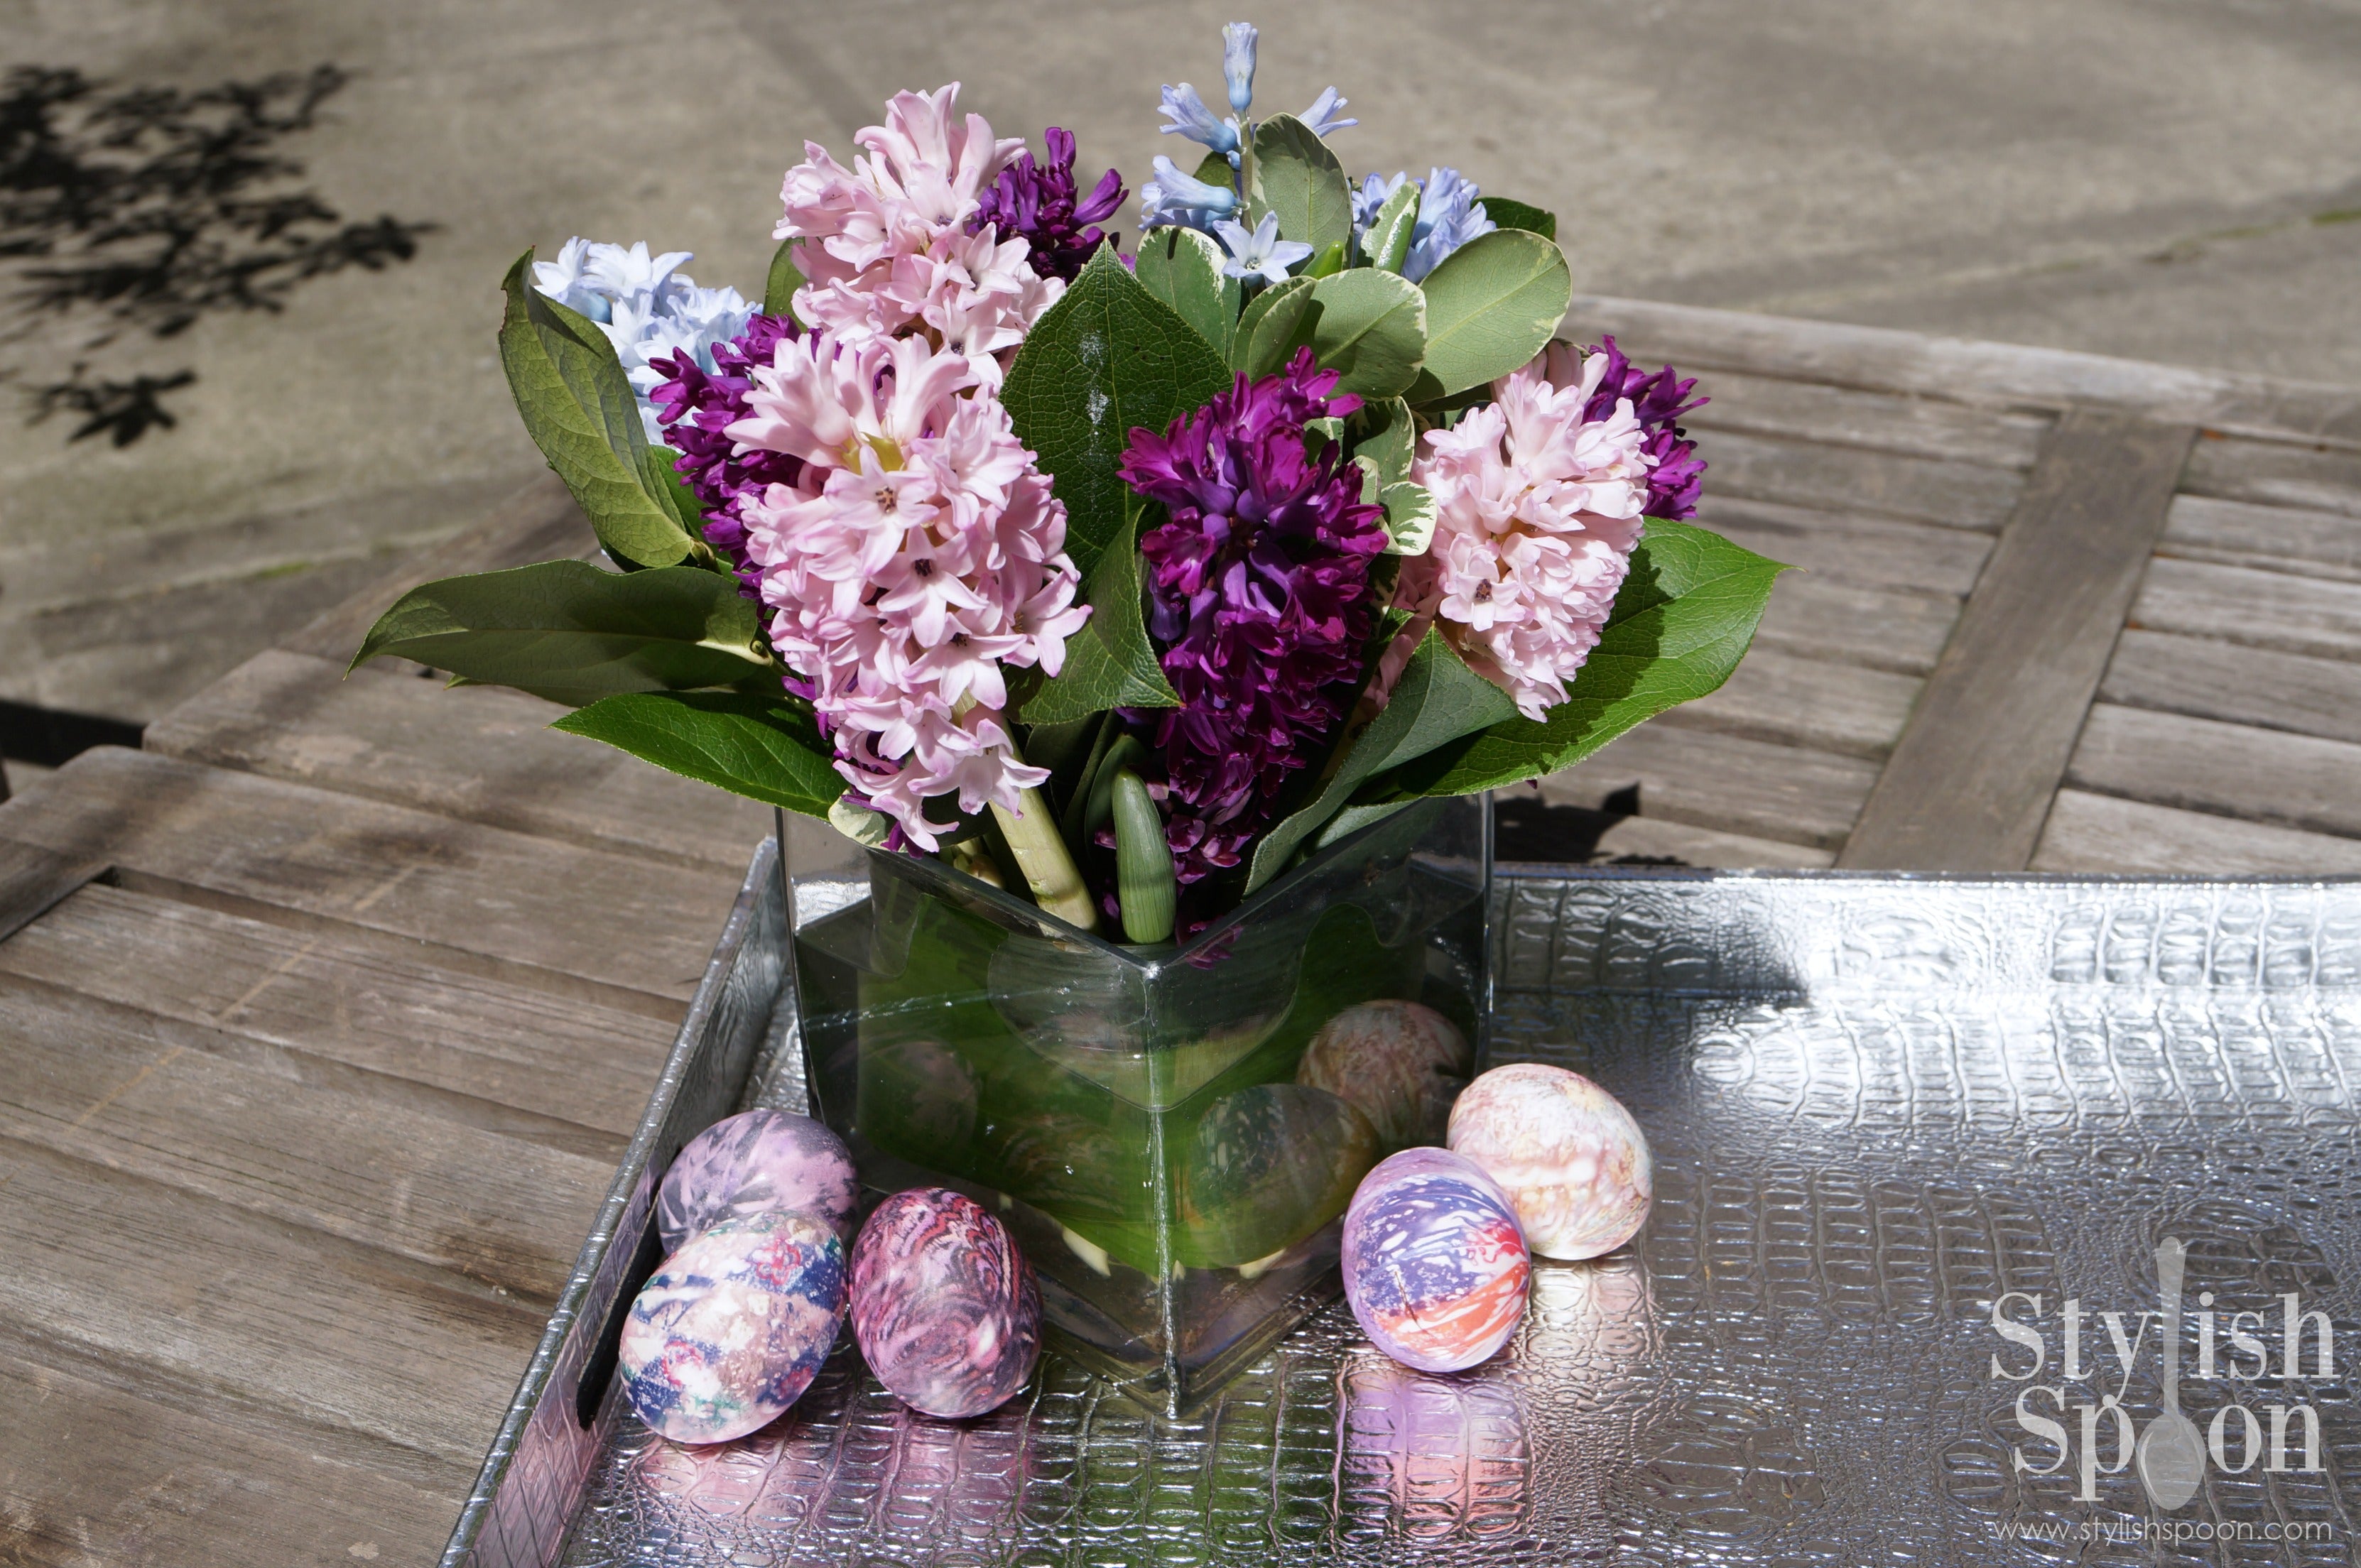 Dye Easter Eggs with Silk Fabric Scraps